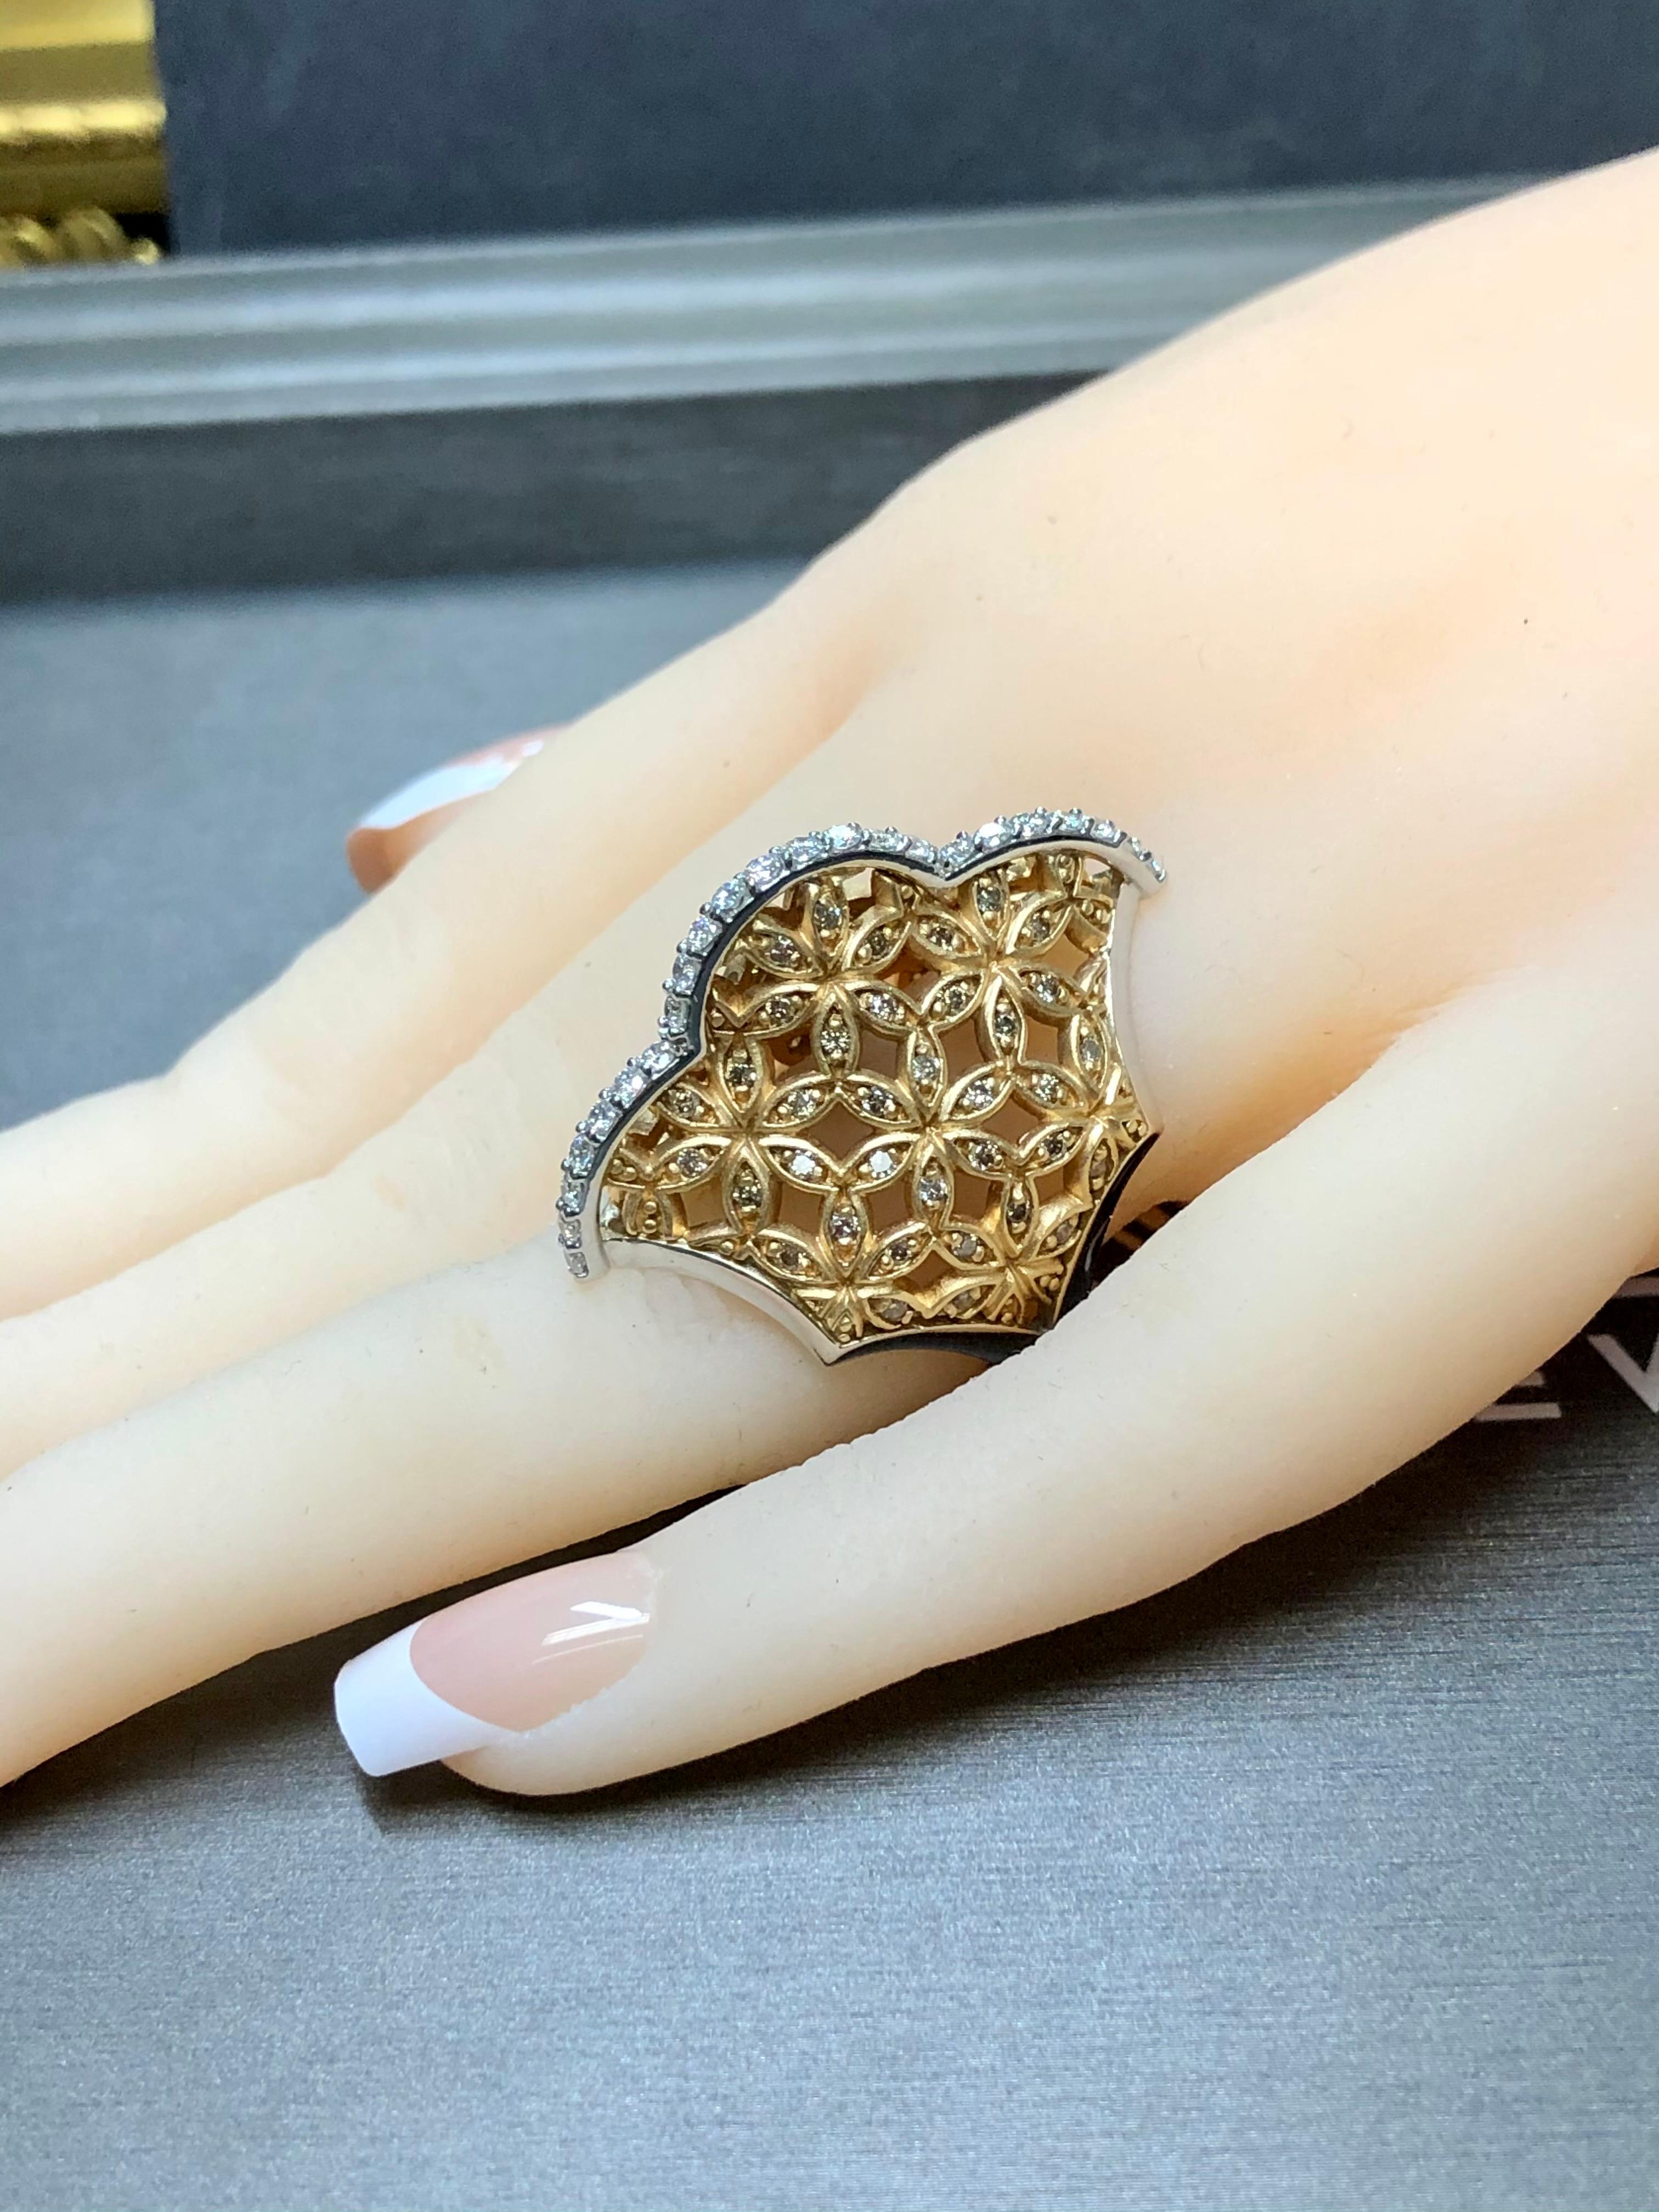 18K ARMAGGAN White Rose Gold Diamond Floral Open Work Cocktail Ring Sz 7.5  For Sale 5